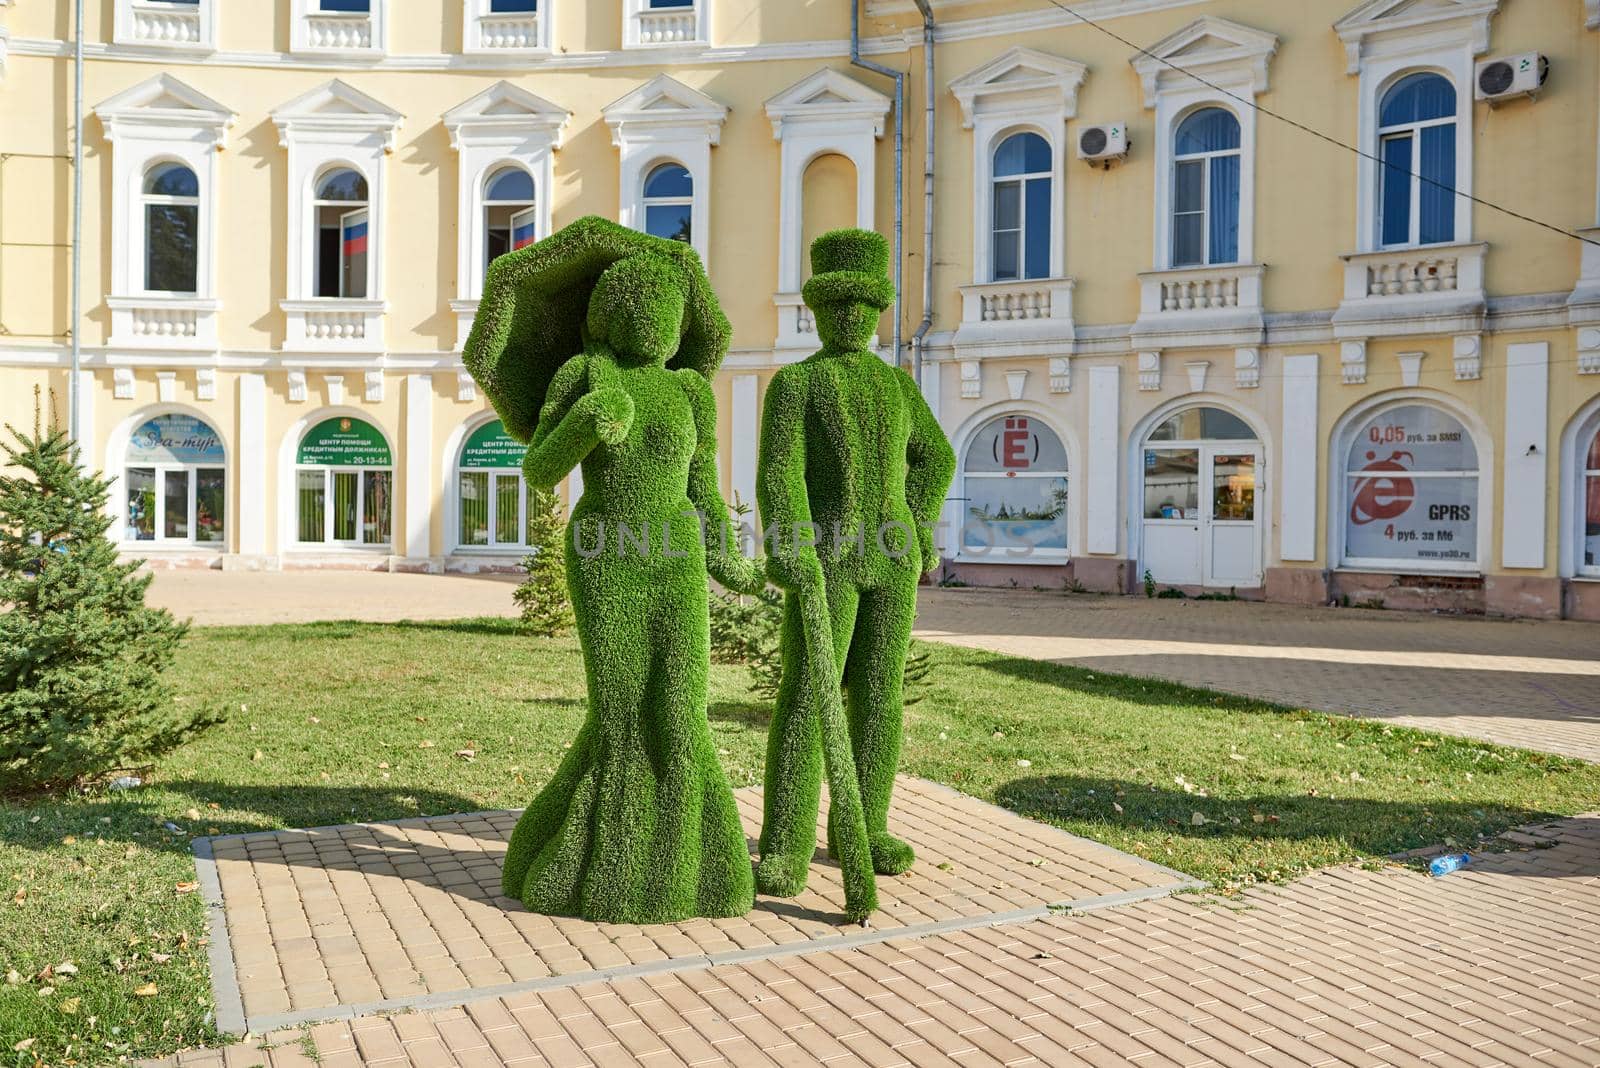 Topiary sculpture of lady with umbrella and dressed in flared skirt and jentleman with a cane and a top hat